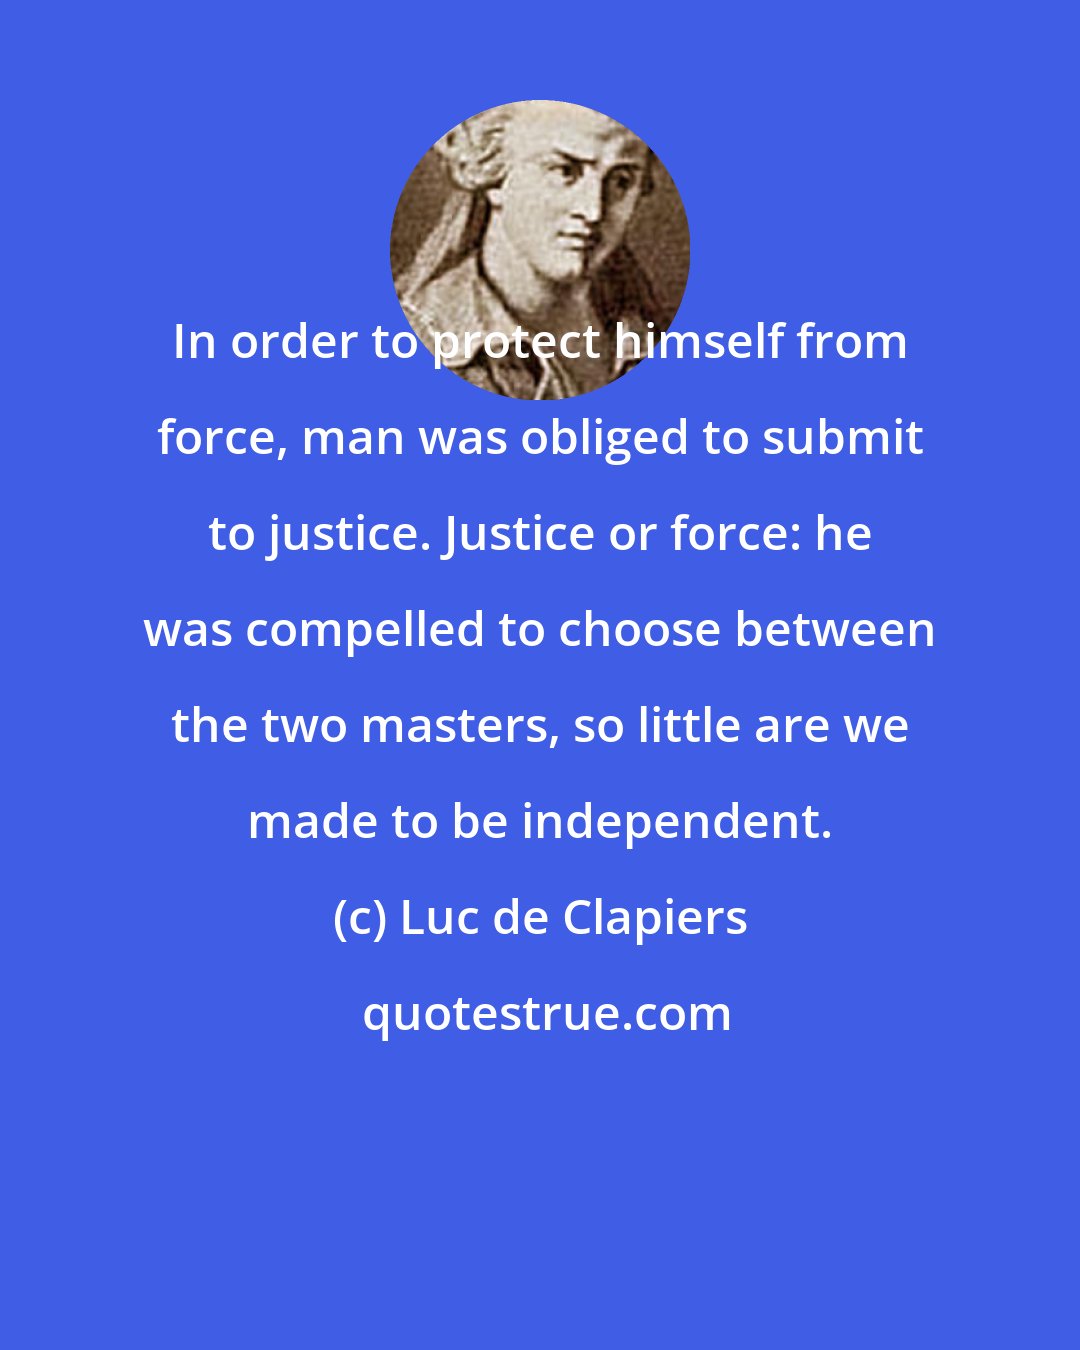 Luc de Clapiers: In order to protect himself from force, man was obliged to submit to justice. Justice or force: he was compelled to choose between the two masters, so little are we made to be independent.